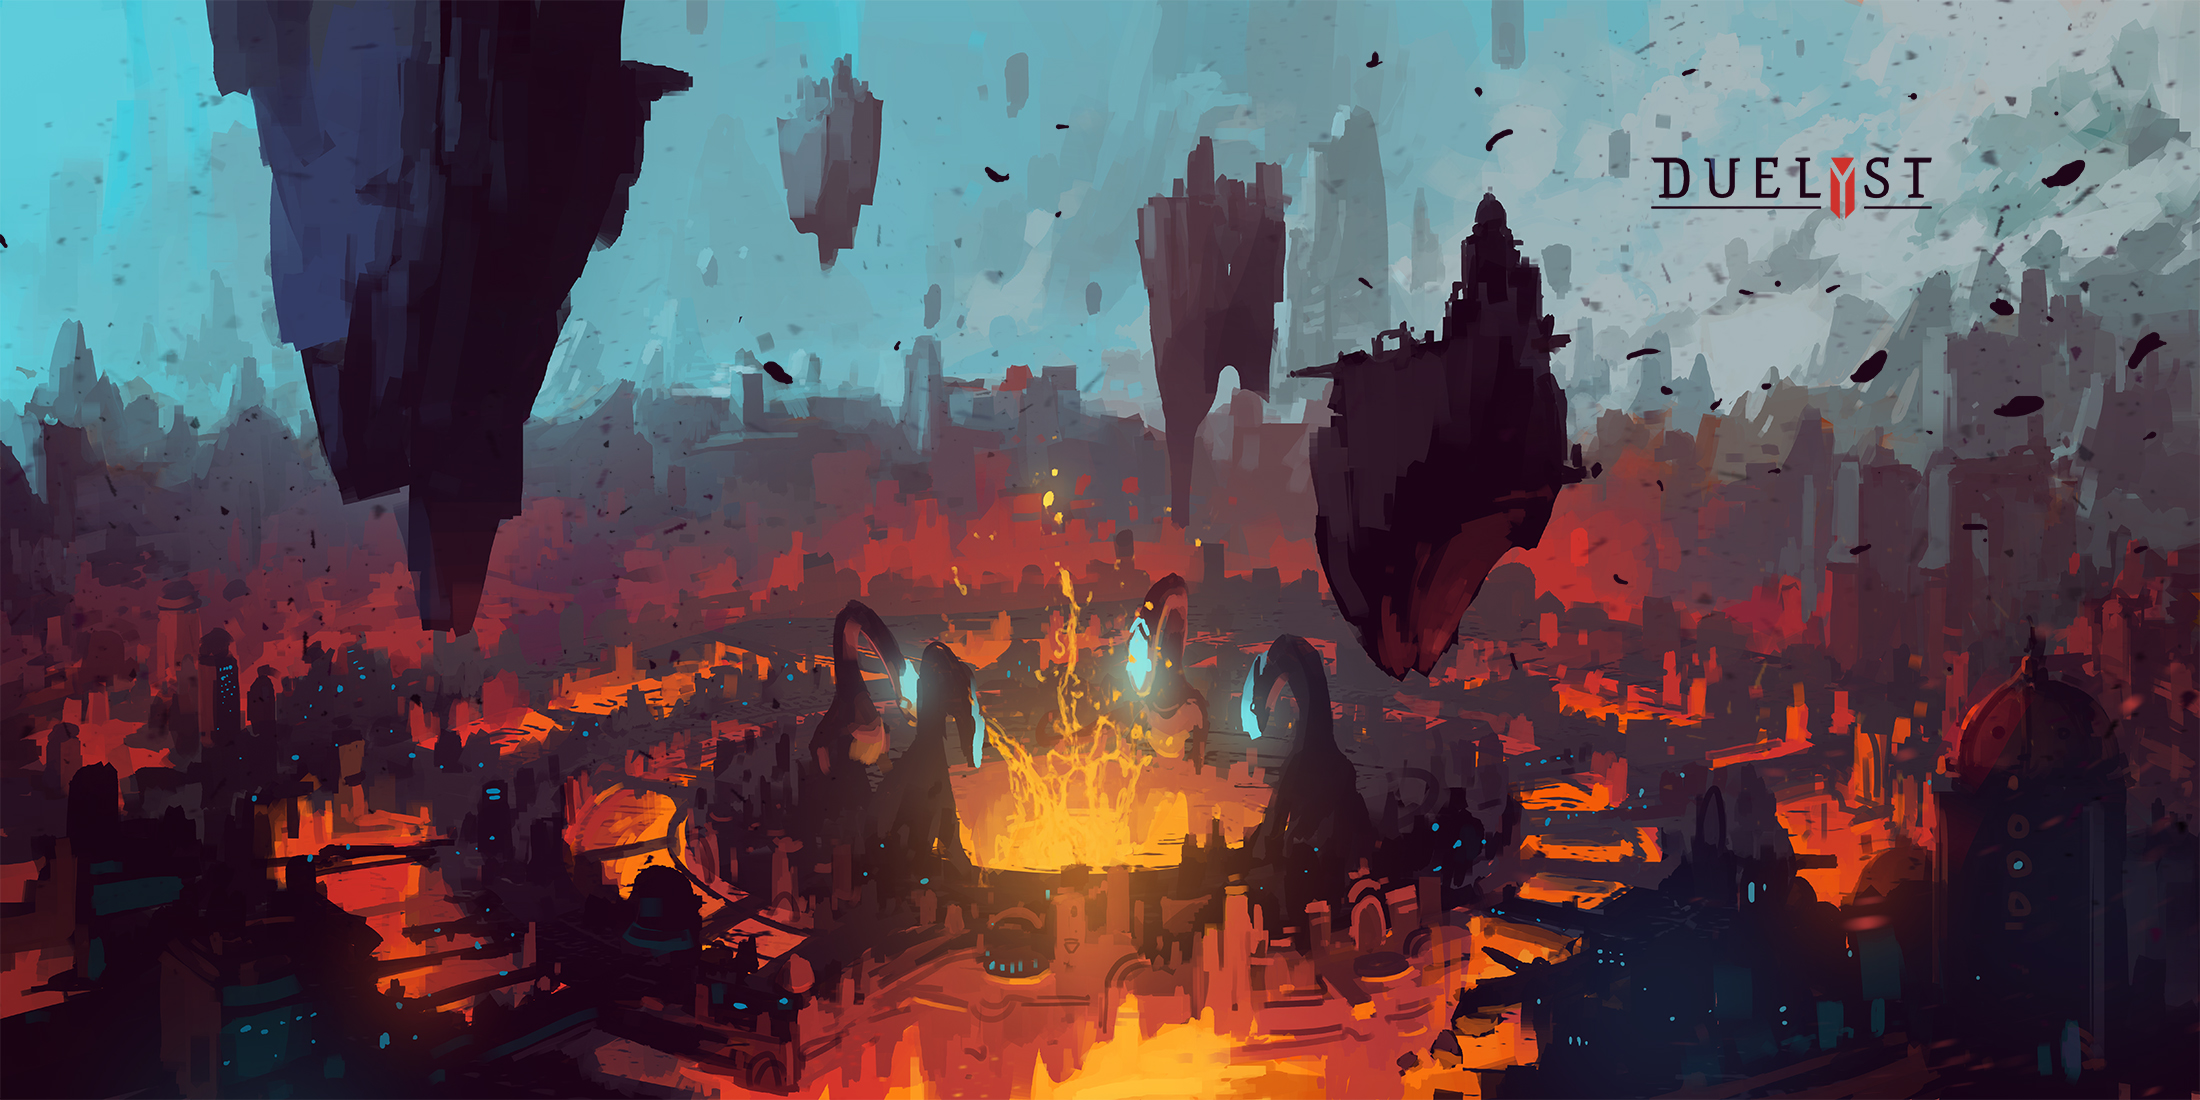 Video Game Duelyst 2200x1100